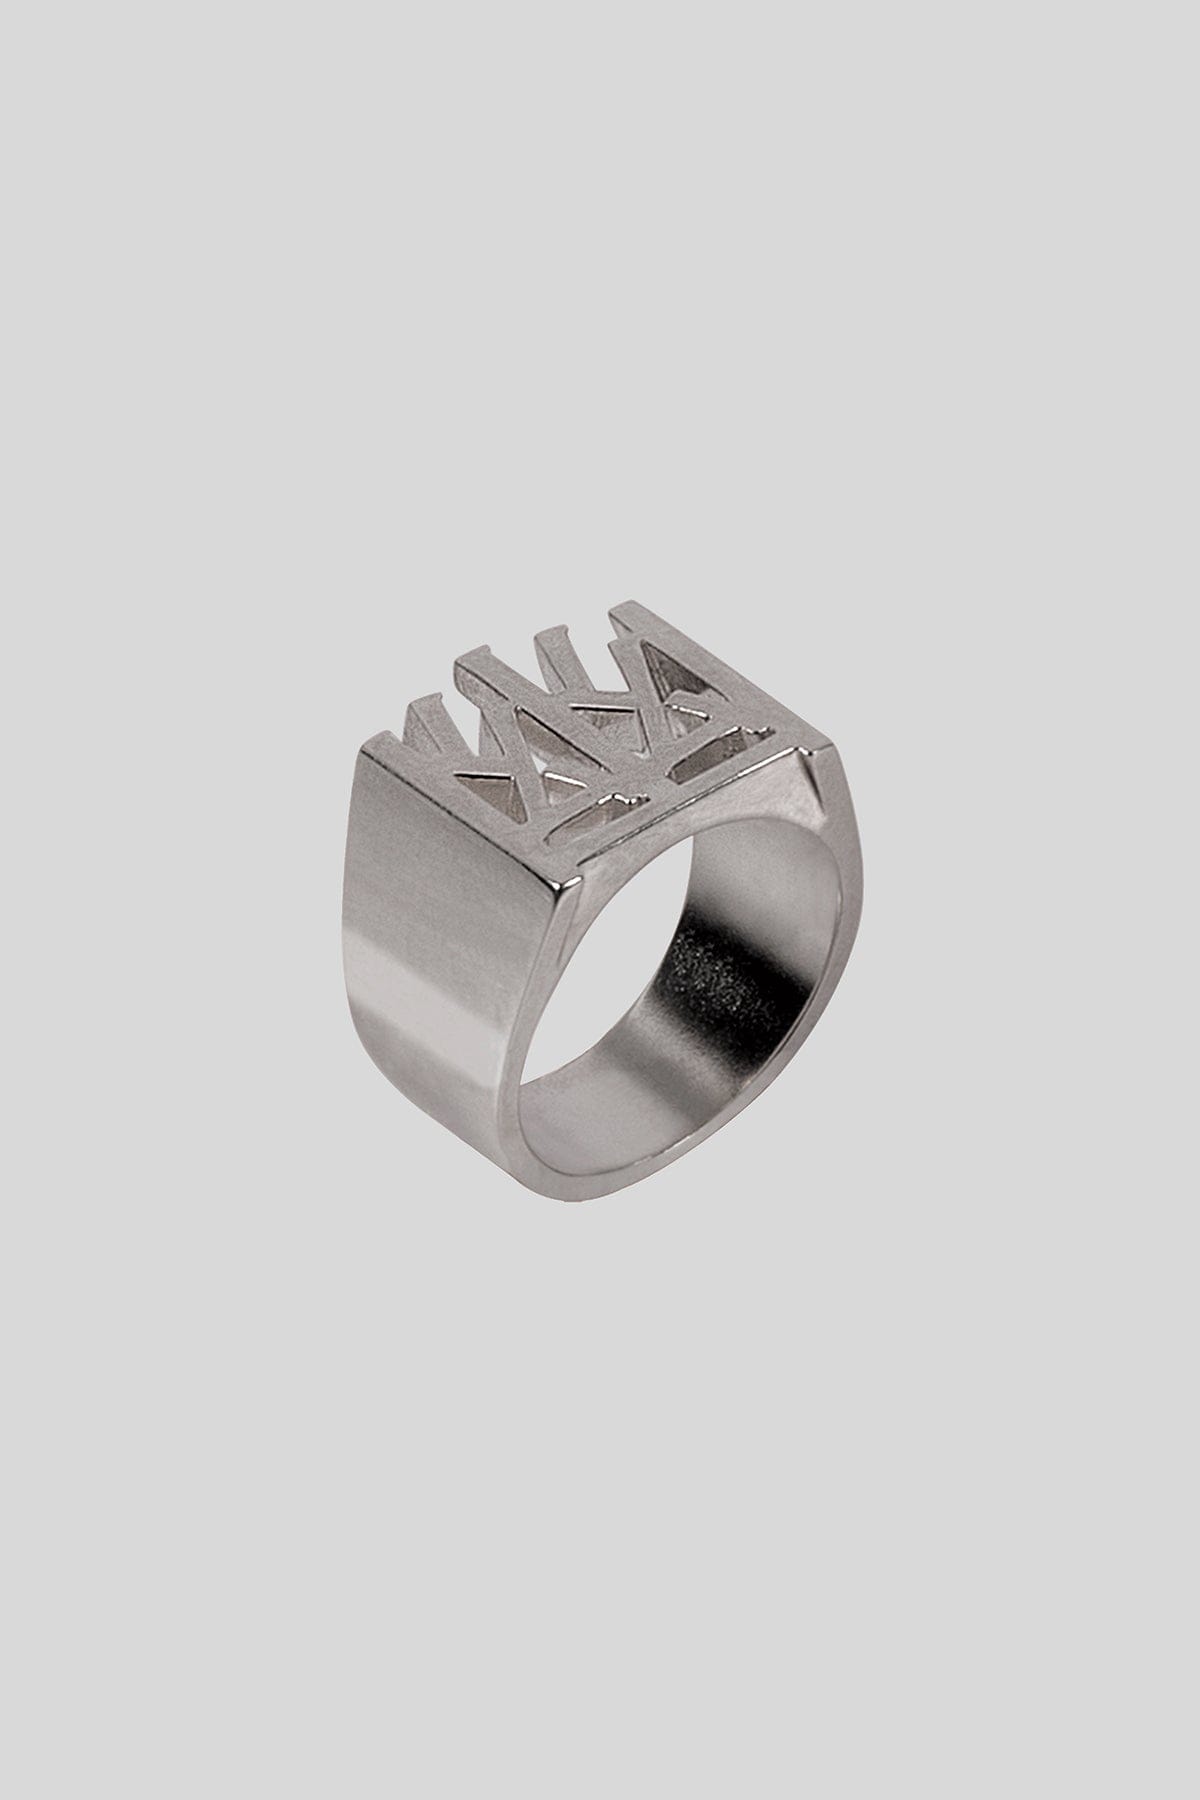 SECLUDED SOUL RING N0.001